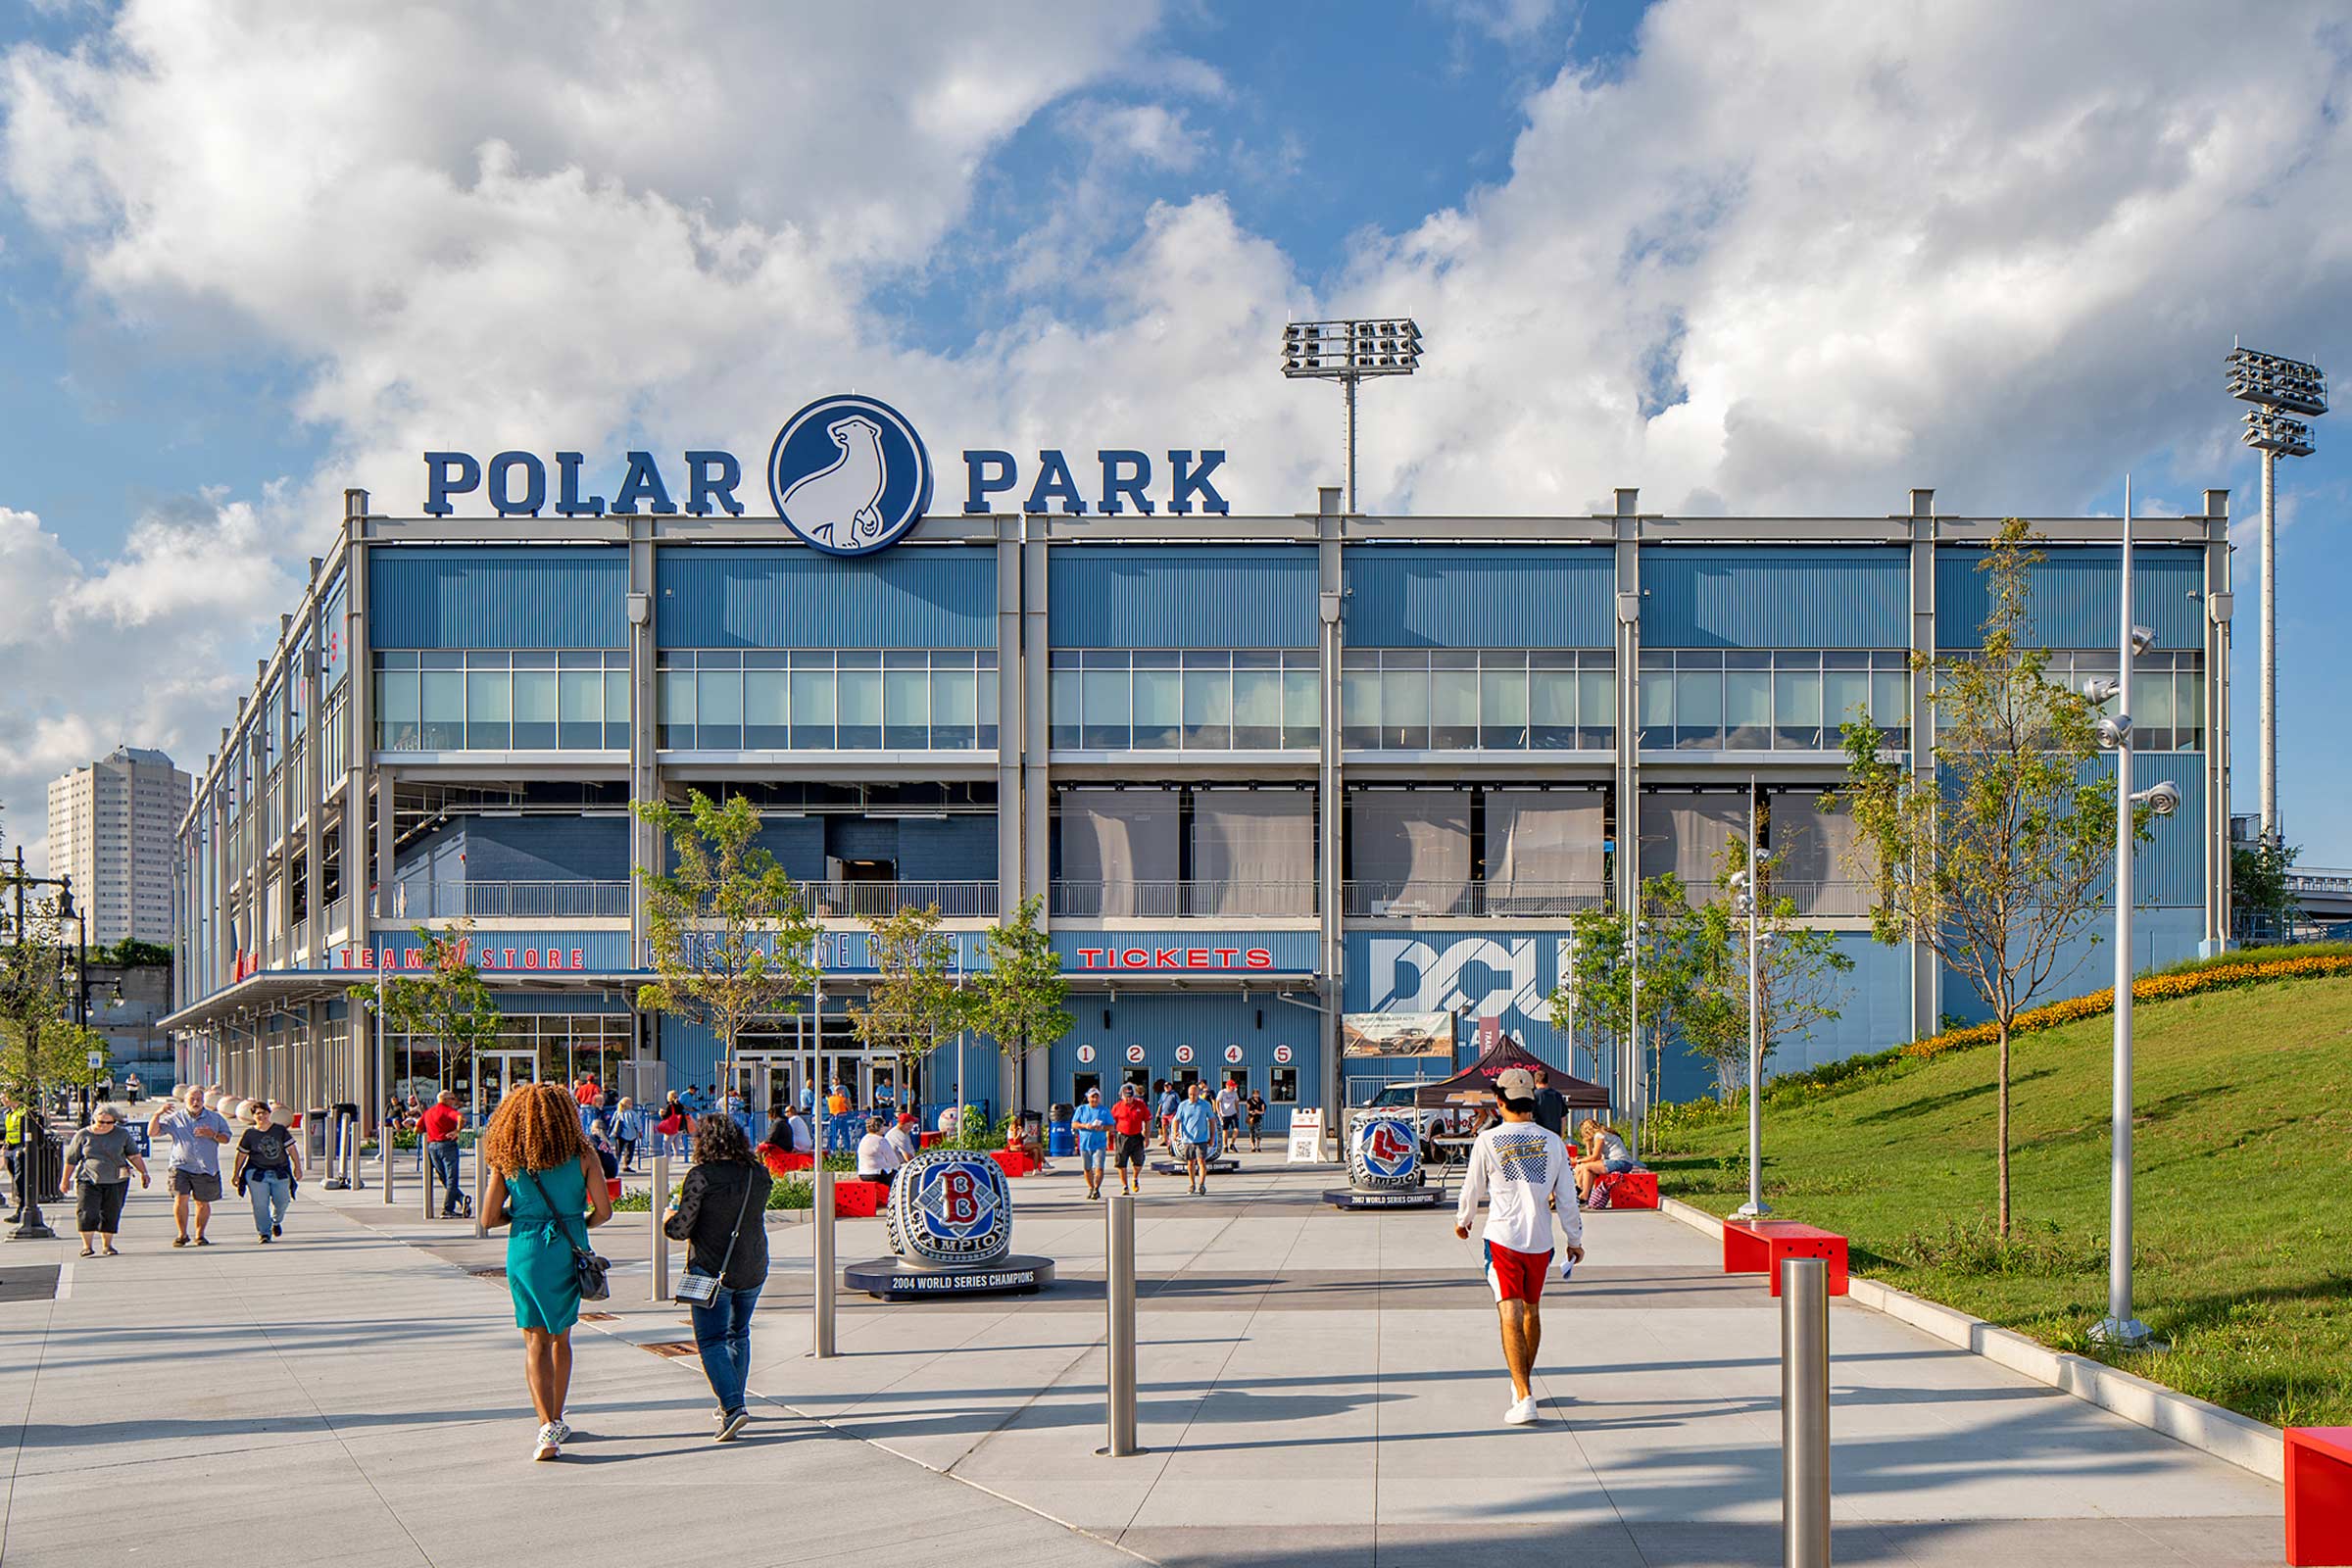 Visit Polar Park, home of the Worcester Red Sox